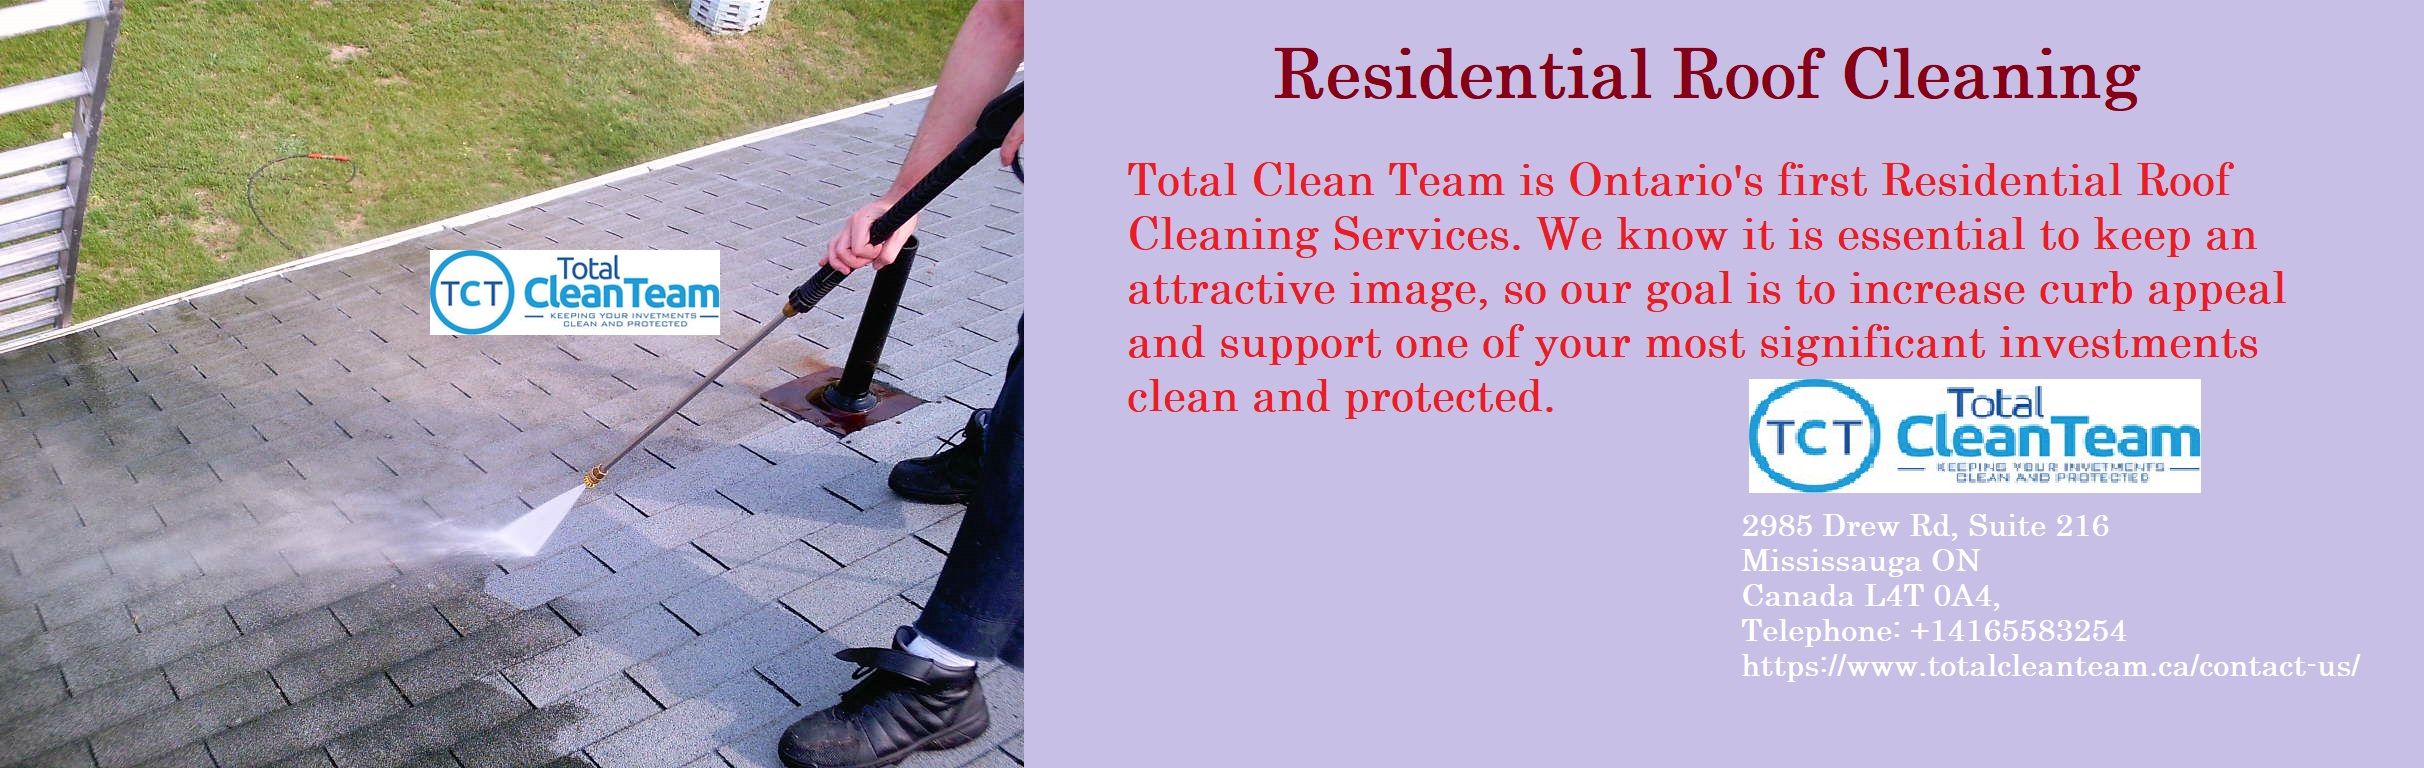 Residential Roof Cleaning | Total Clean Team Inc.